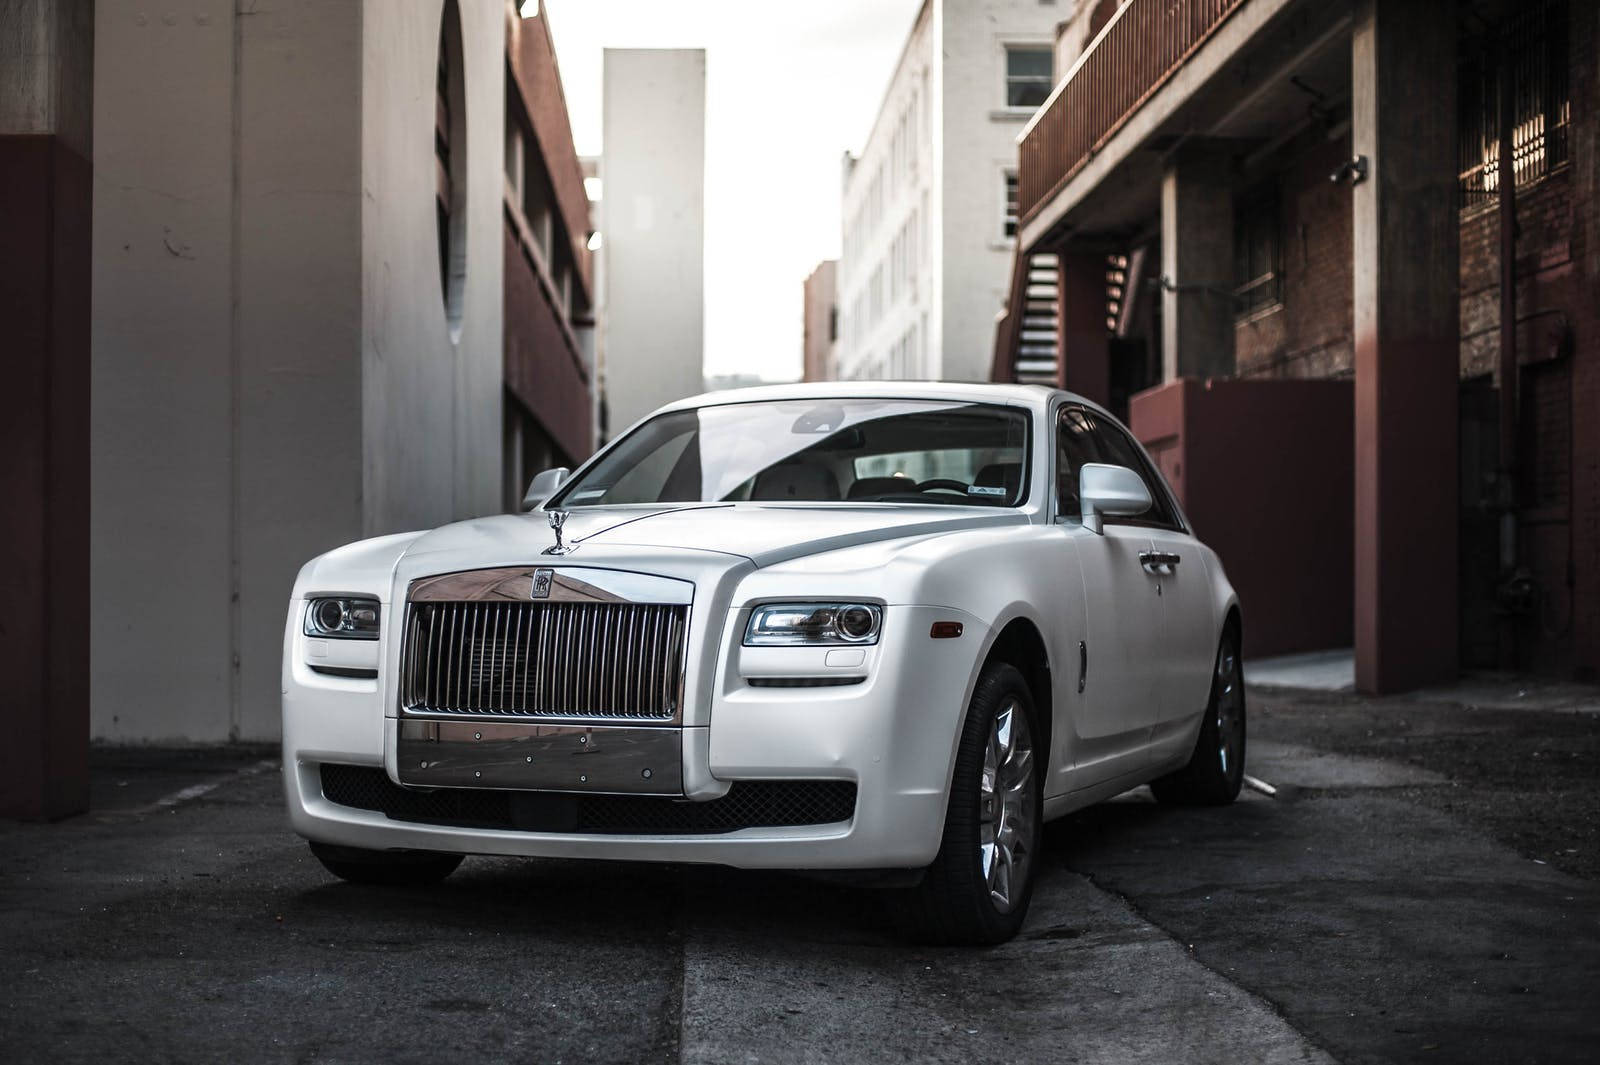 A Vision Of Prestige - White Ghost Luxury Car In An Alley Wallpaper